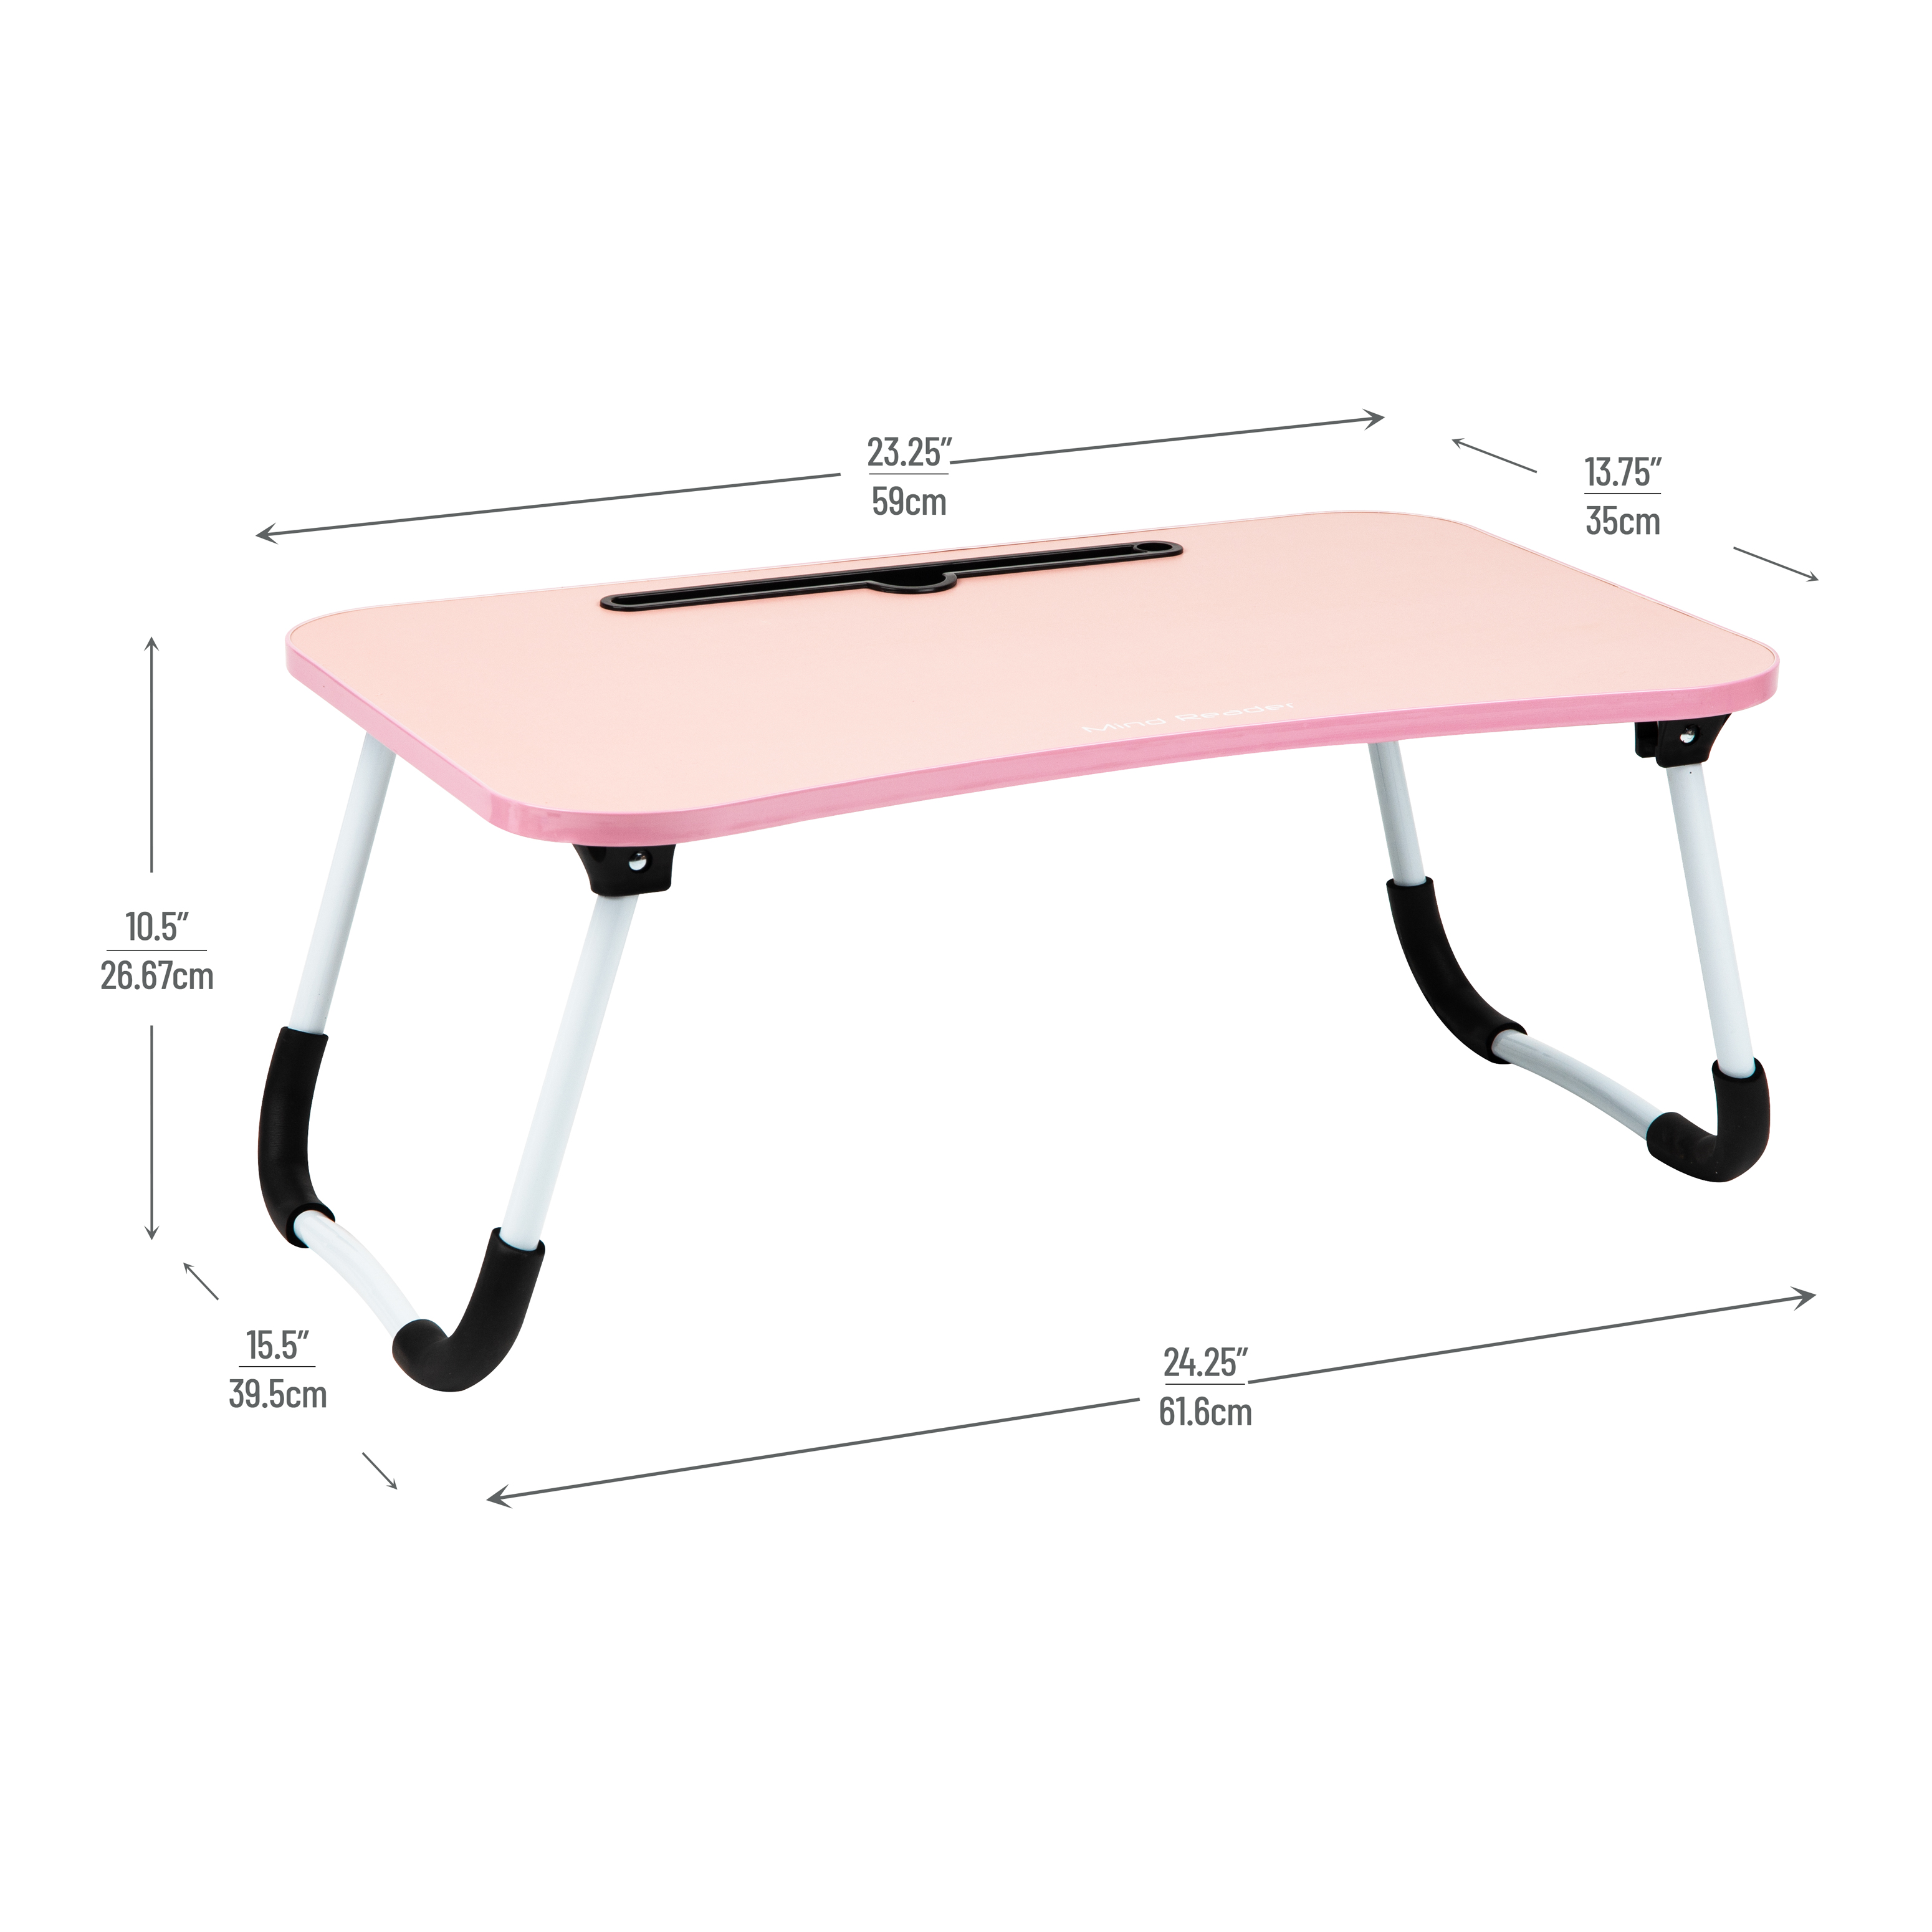 Left View: Mind Reader - Lap Desk Laptop Stand, Bed Tray, Folding Legs, Couch Table, Portable, MDF , 23.25"L x 13.75"W x 10.5"H - Pink